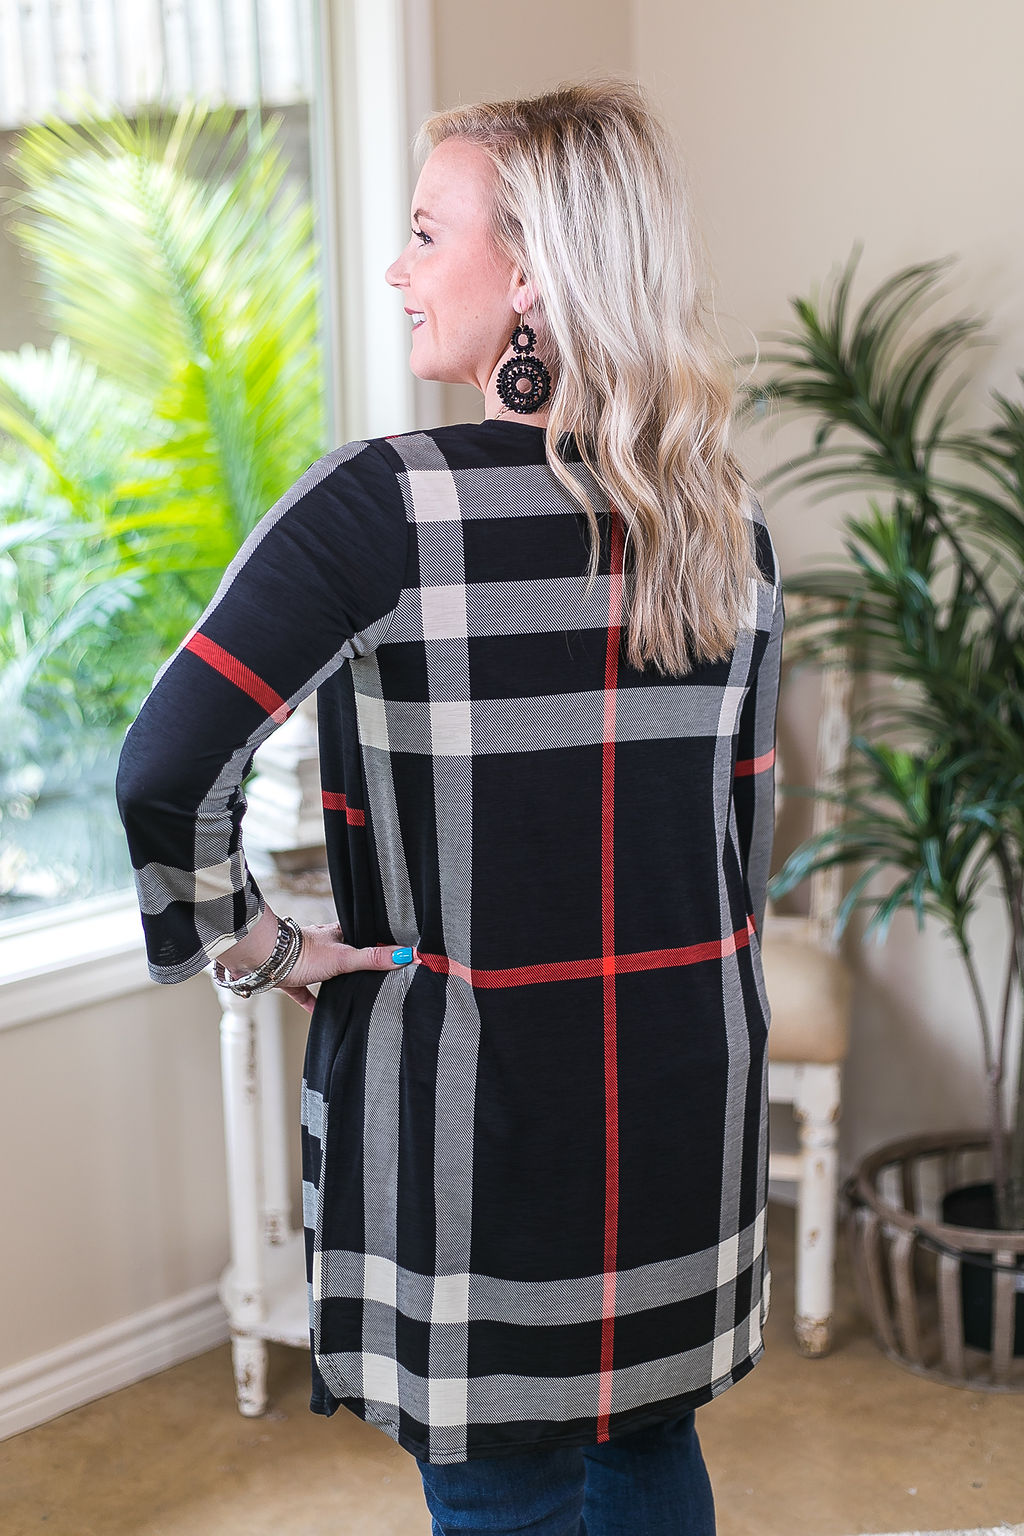 All Eyes On You Large Plaid Cardigan in Black - Giddy Up Glamour Boutique